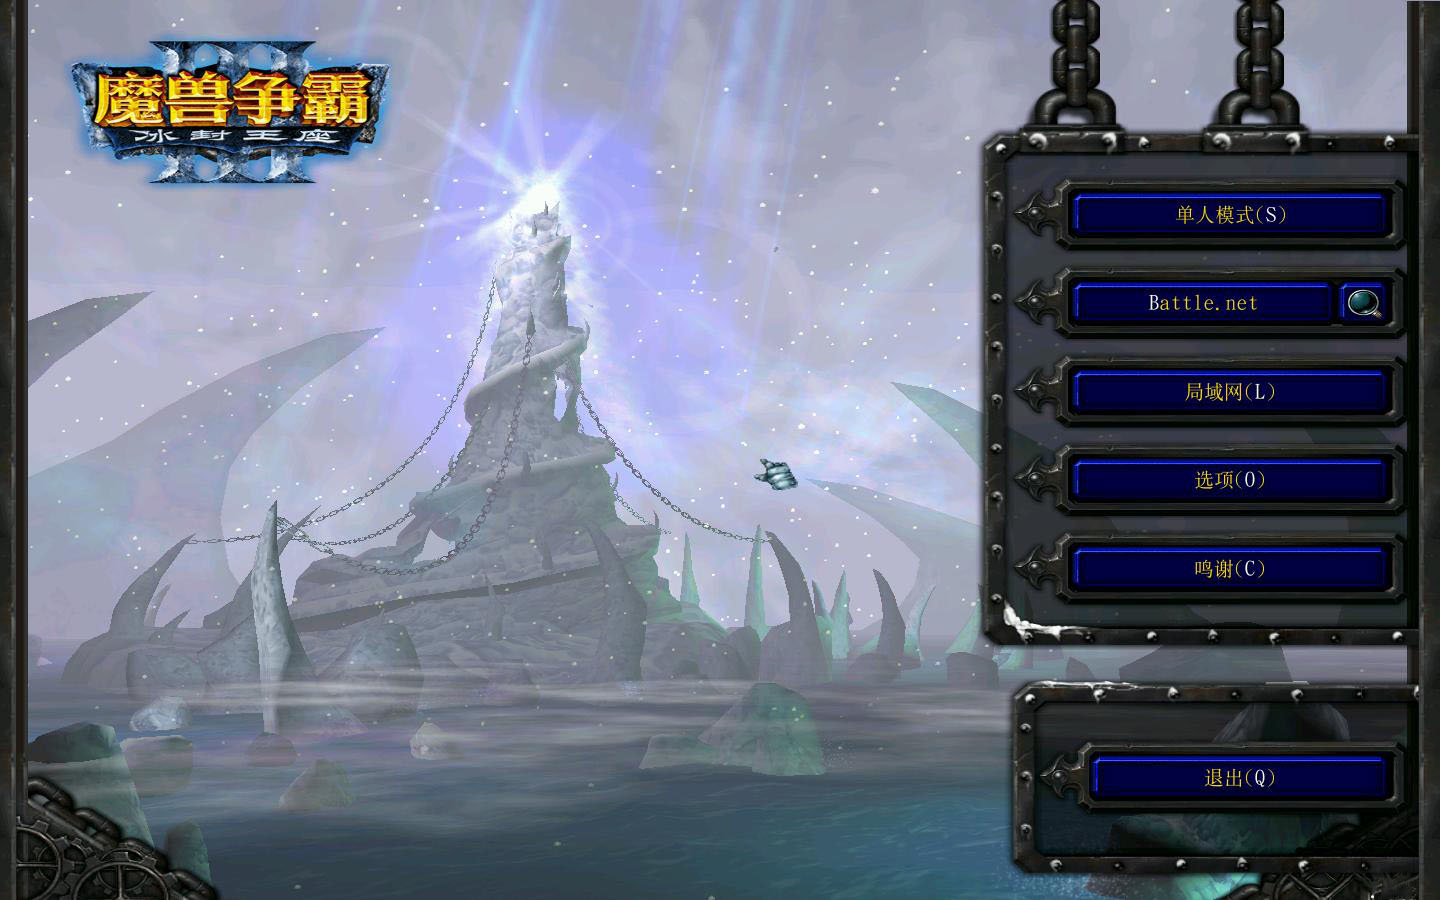 ħ3Warcraft III The Frozen Throne1.24-1.28IV֮ v5.7ʽ